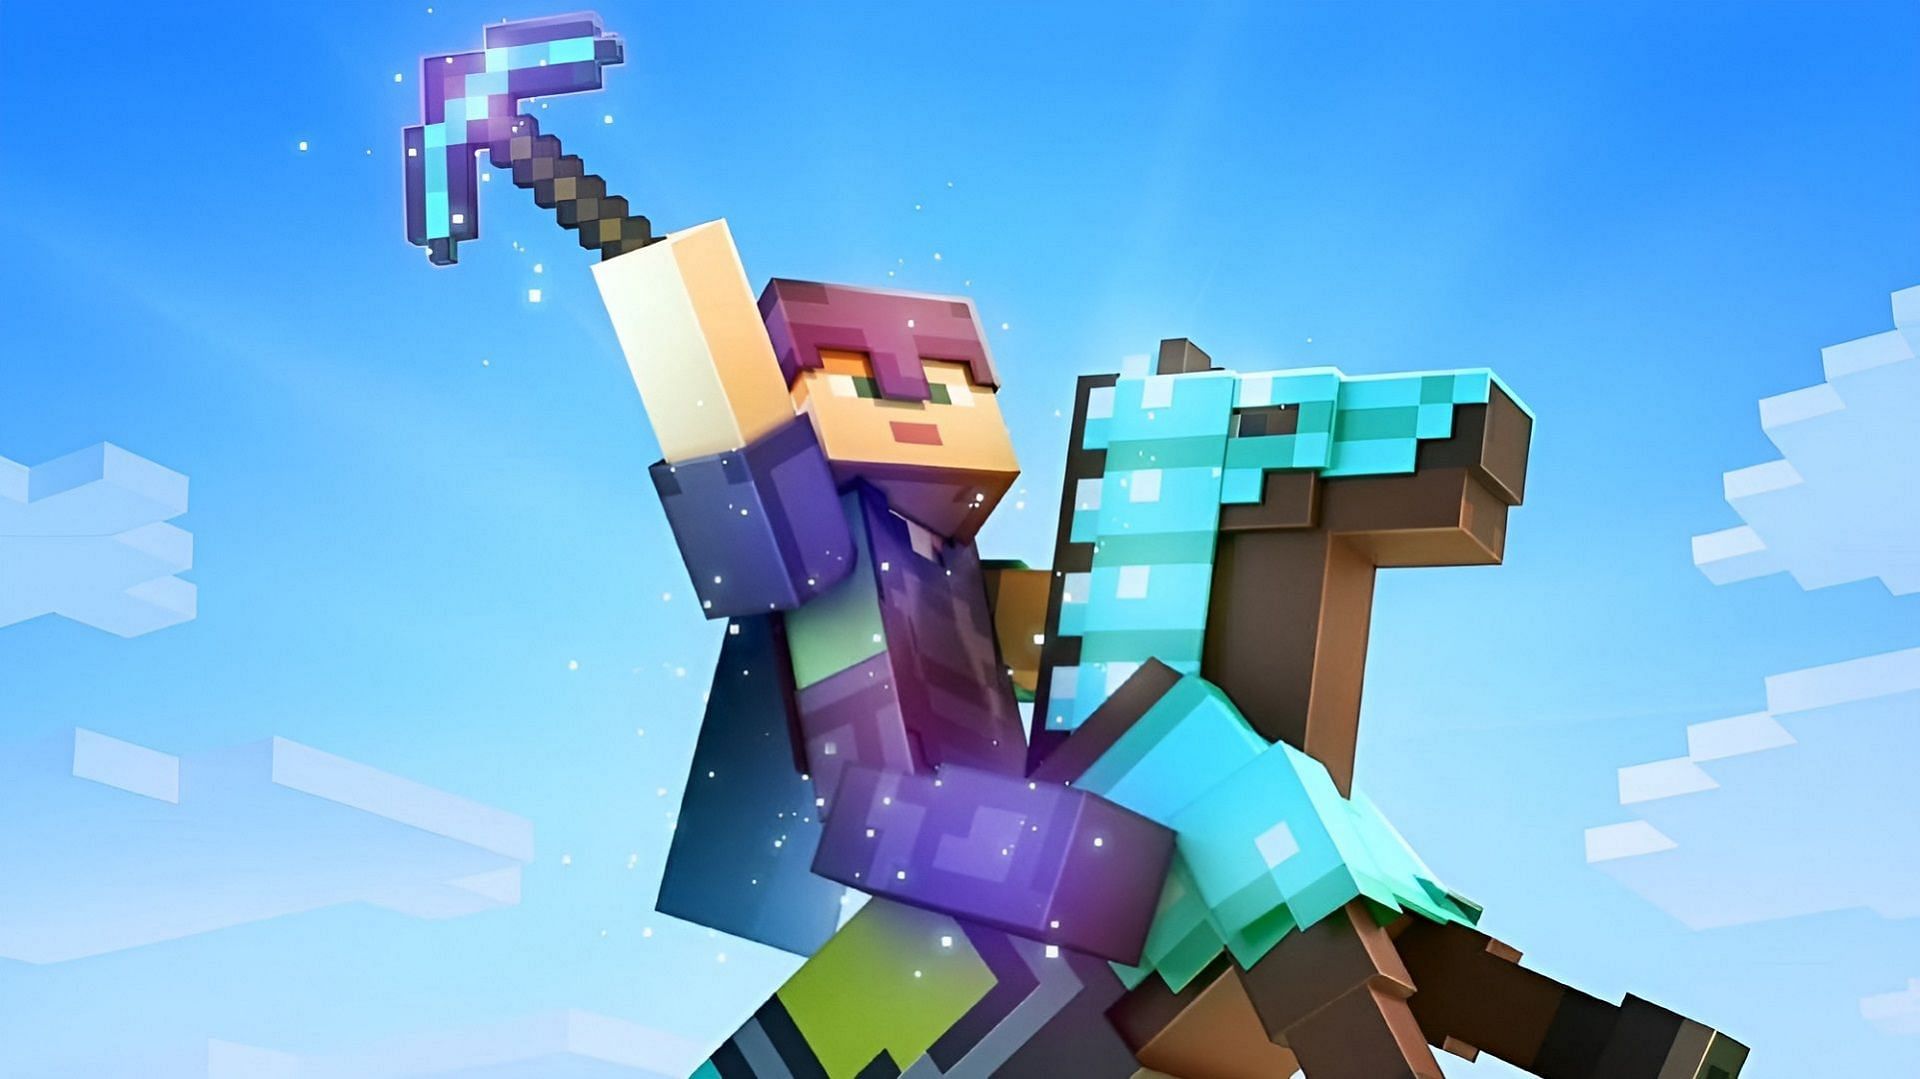 Minecraft has got one thing wrong about horses, and it has annoyed some fans